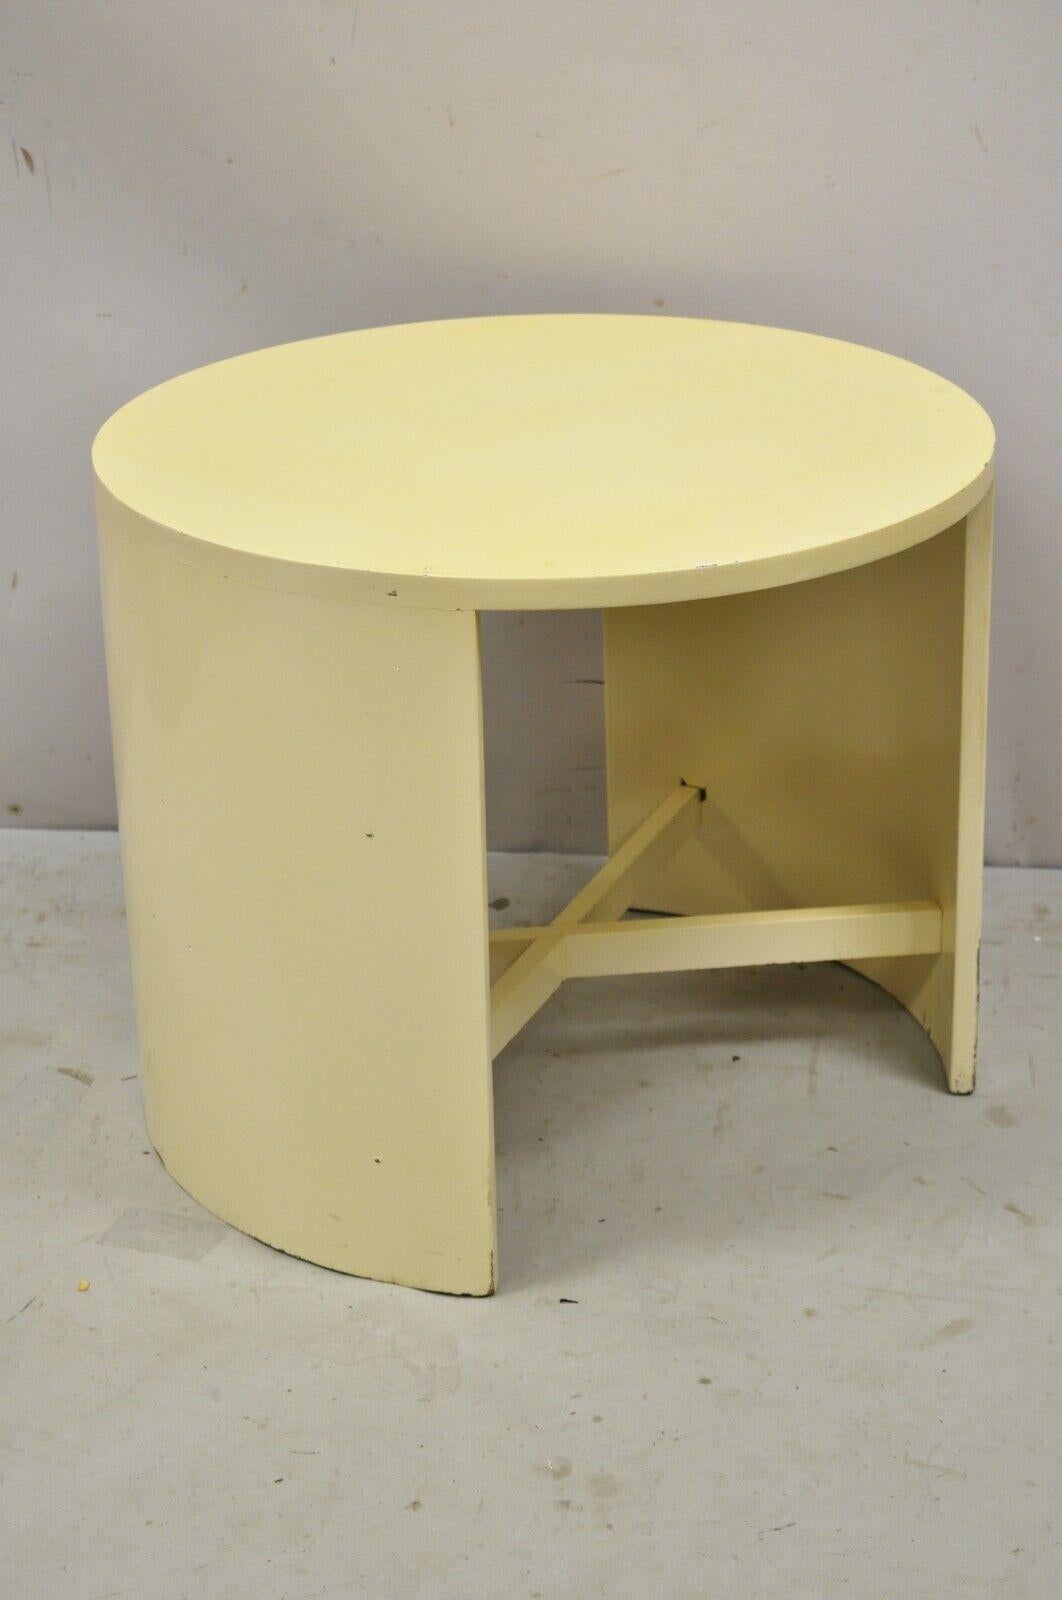 Midcentury bone lacquer round post modernist stretcher base accent side table. Item features Round top, cross stretcher base, beige lacquer finish. circa 1970. Measurements: 18